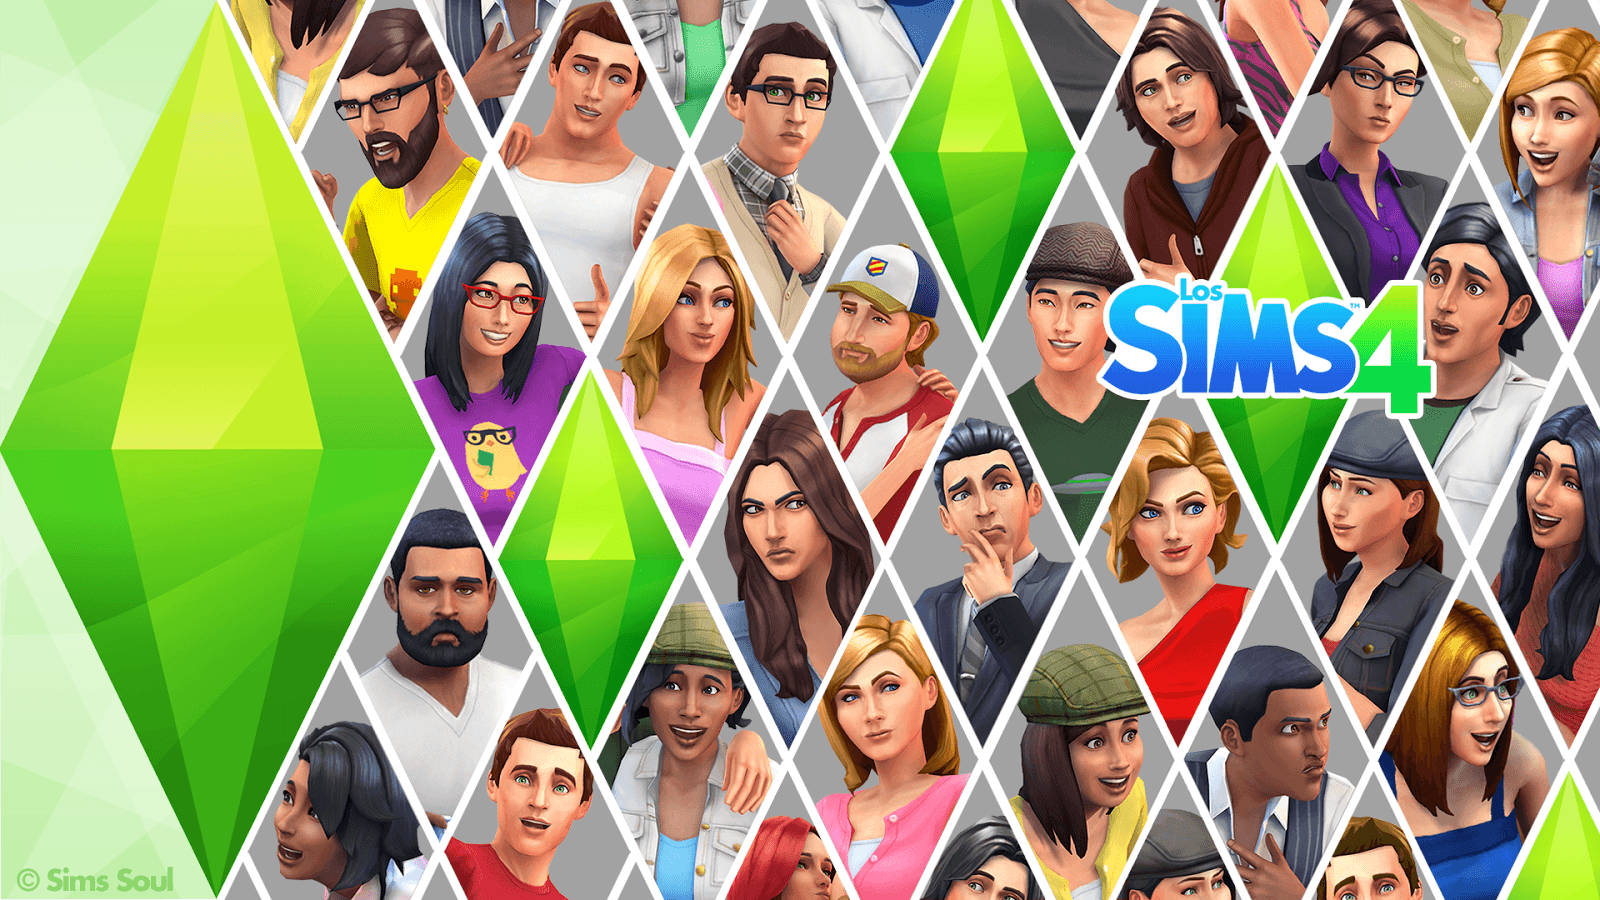 The Sims 1600 X 900 Wallpaper